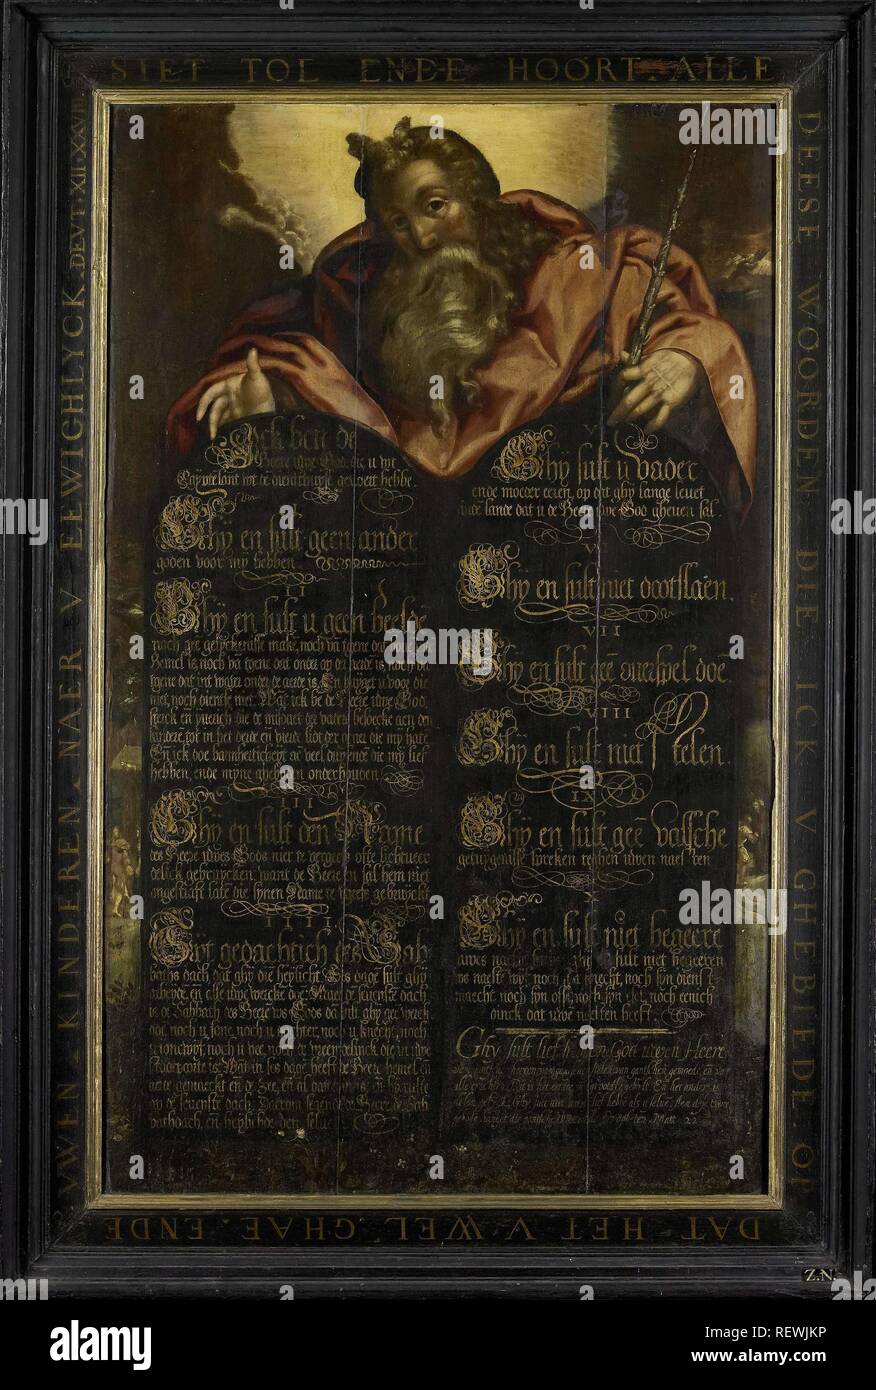 Moses showing the Tables of the Law with the Ten Commandments in Calligraphy. Dating: c. 1560 and/or c. 1600. Place: Southern Netherlands. Measurements: h 112 cm × w 68 cm; d 7.4 cm. Museum: Rijksmuseum, Amsterdam. Author: ANONYMOUS. Stock Photo